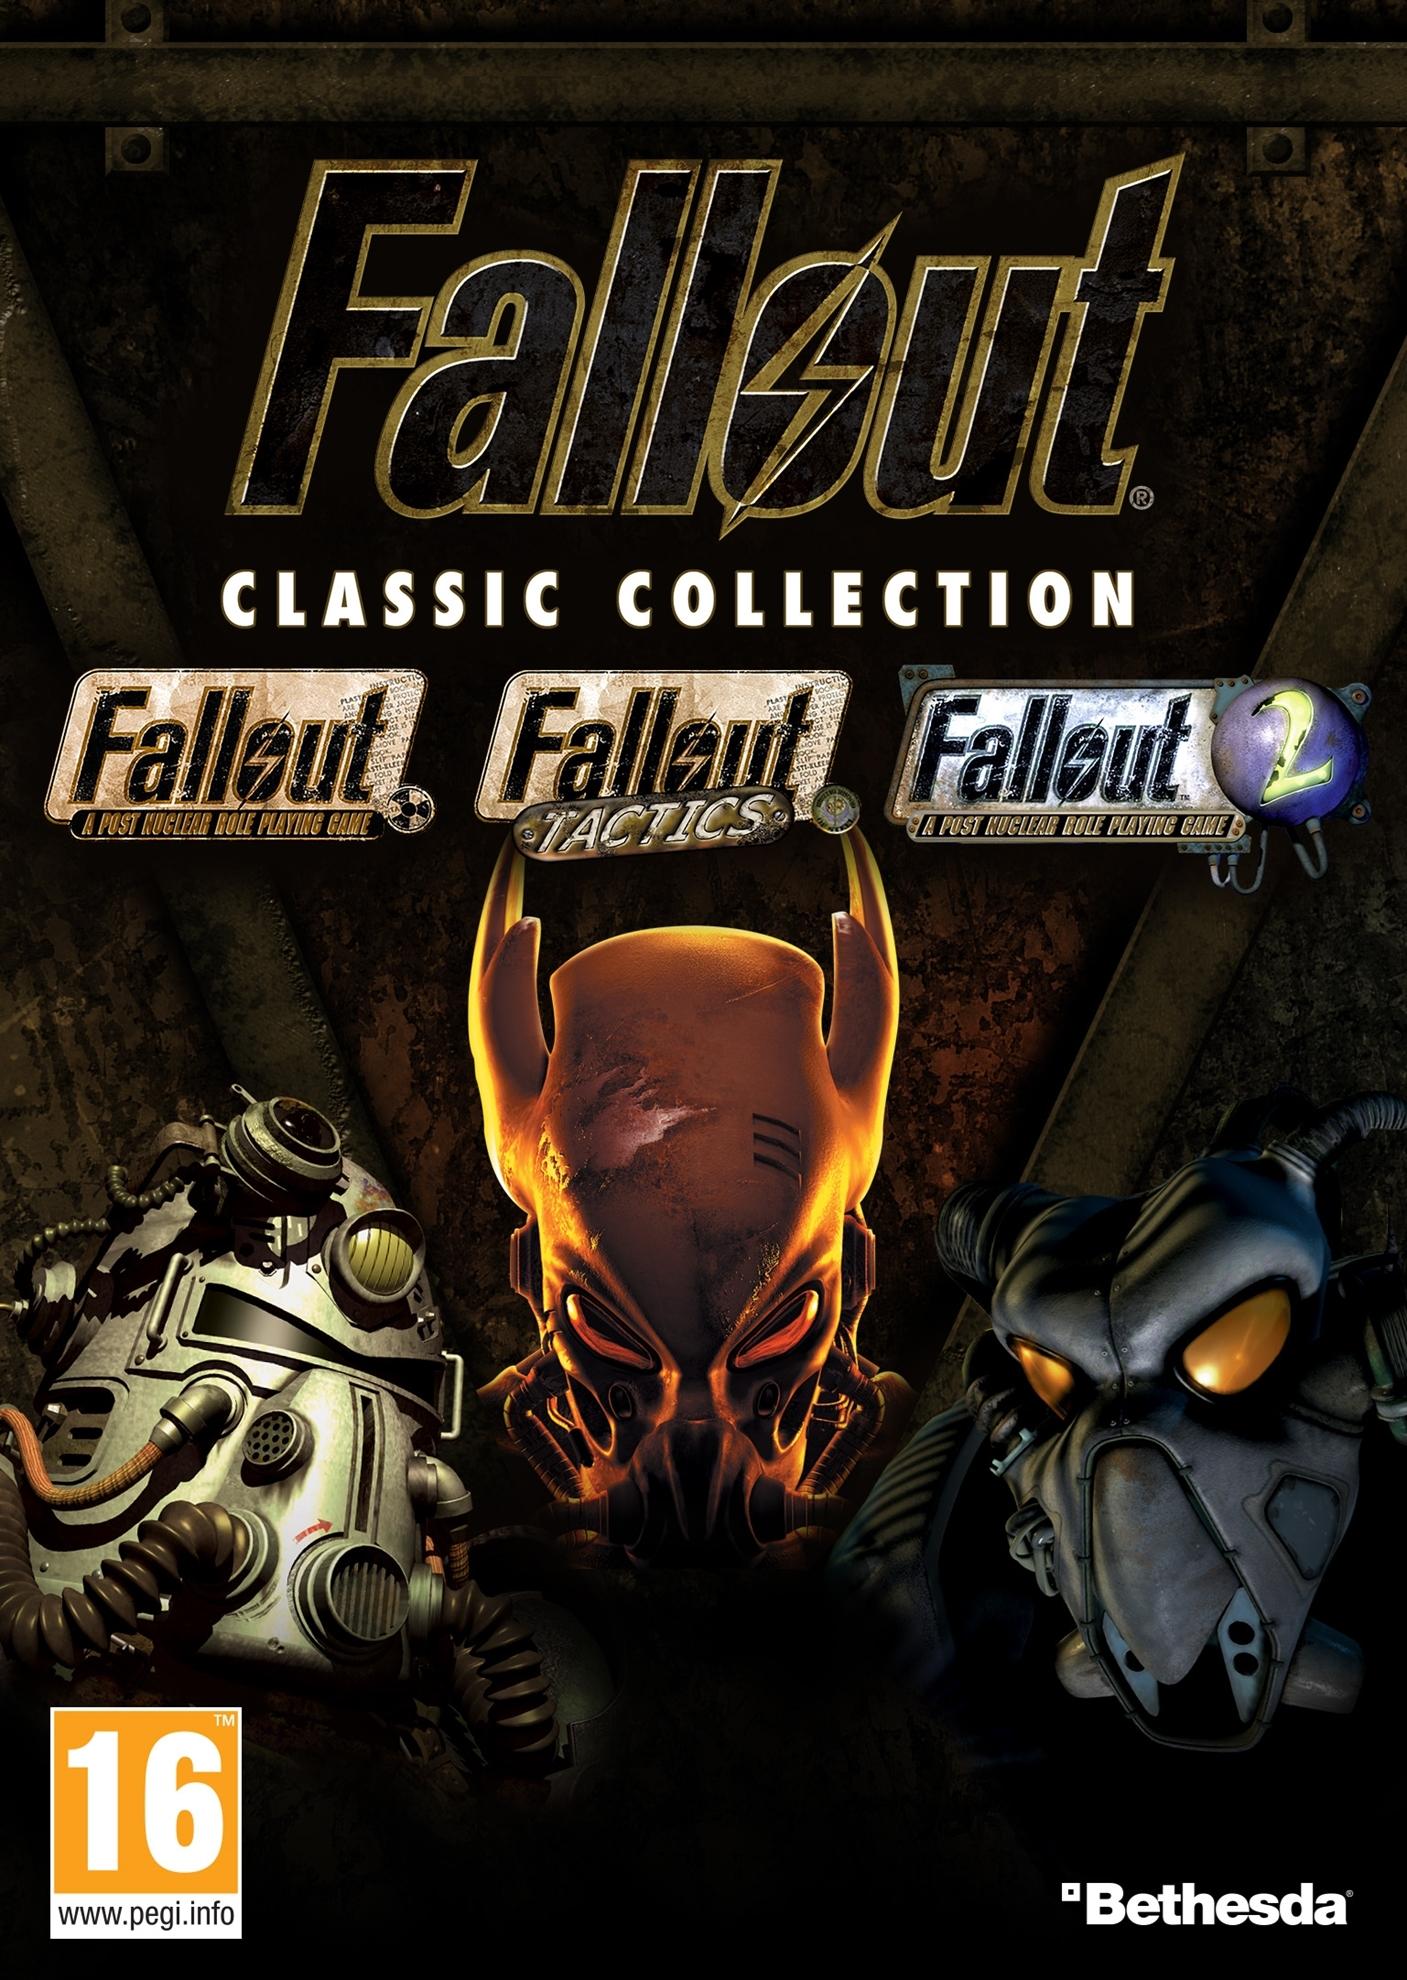 Fallout Classic Collection